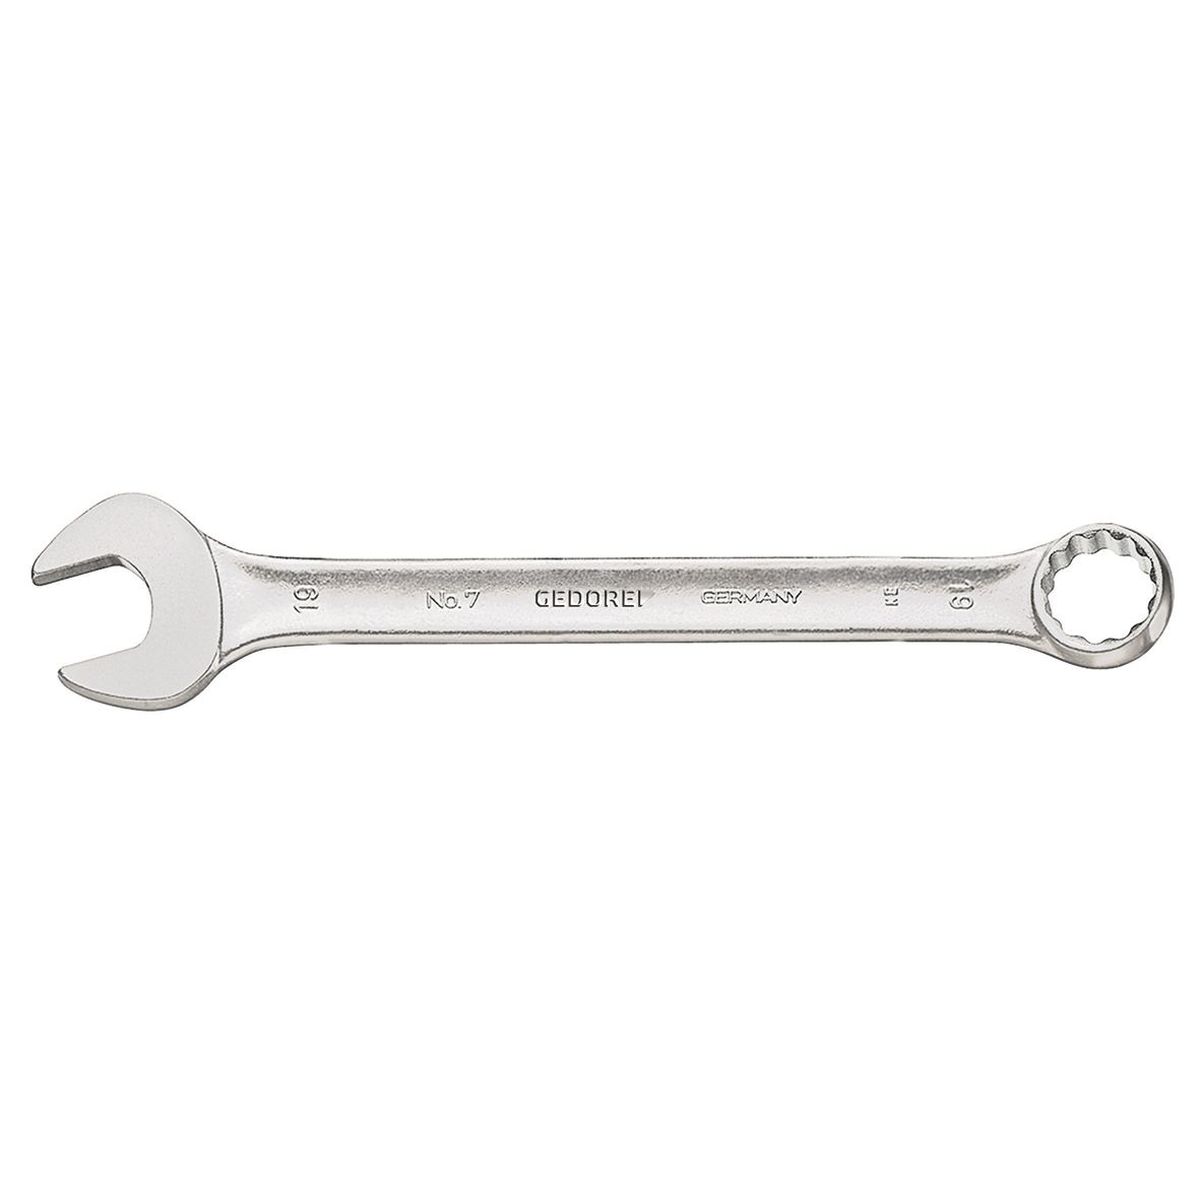 Combination spanner 27mm No.7 27 Gedore